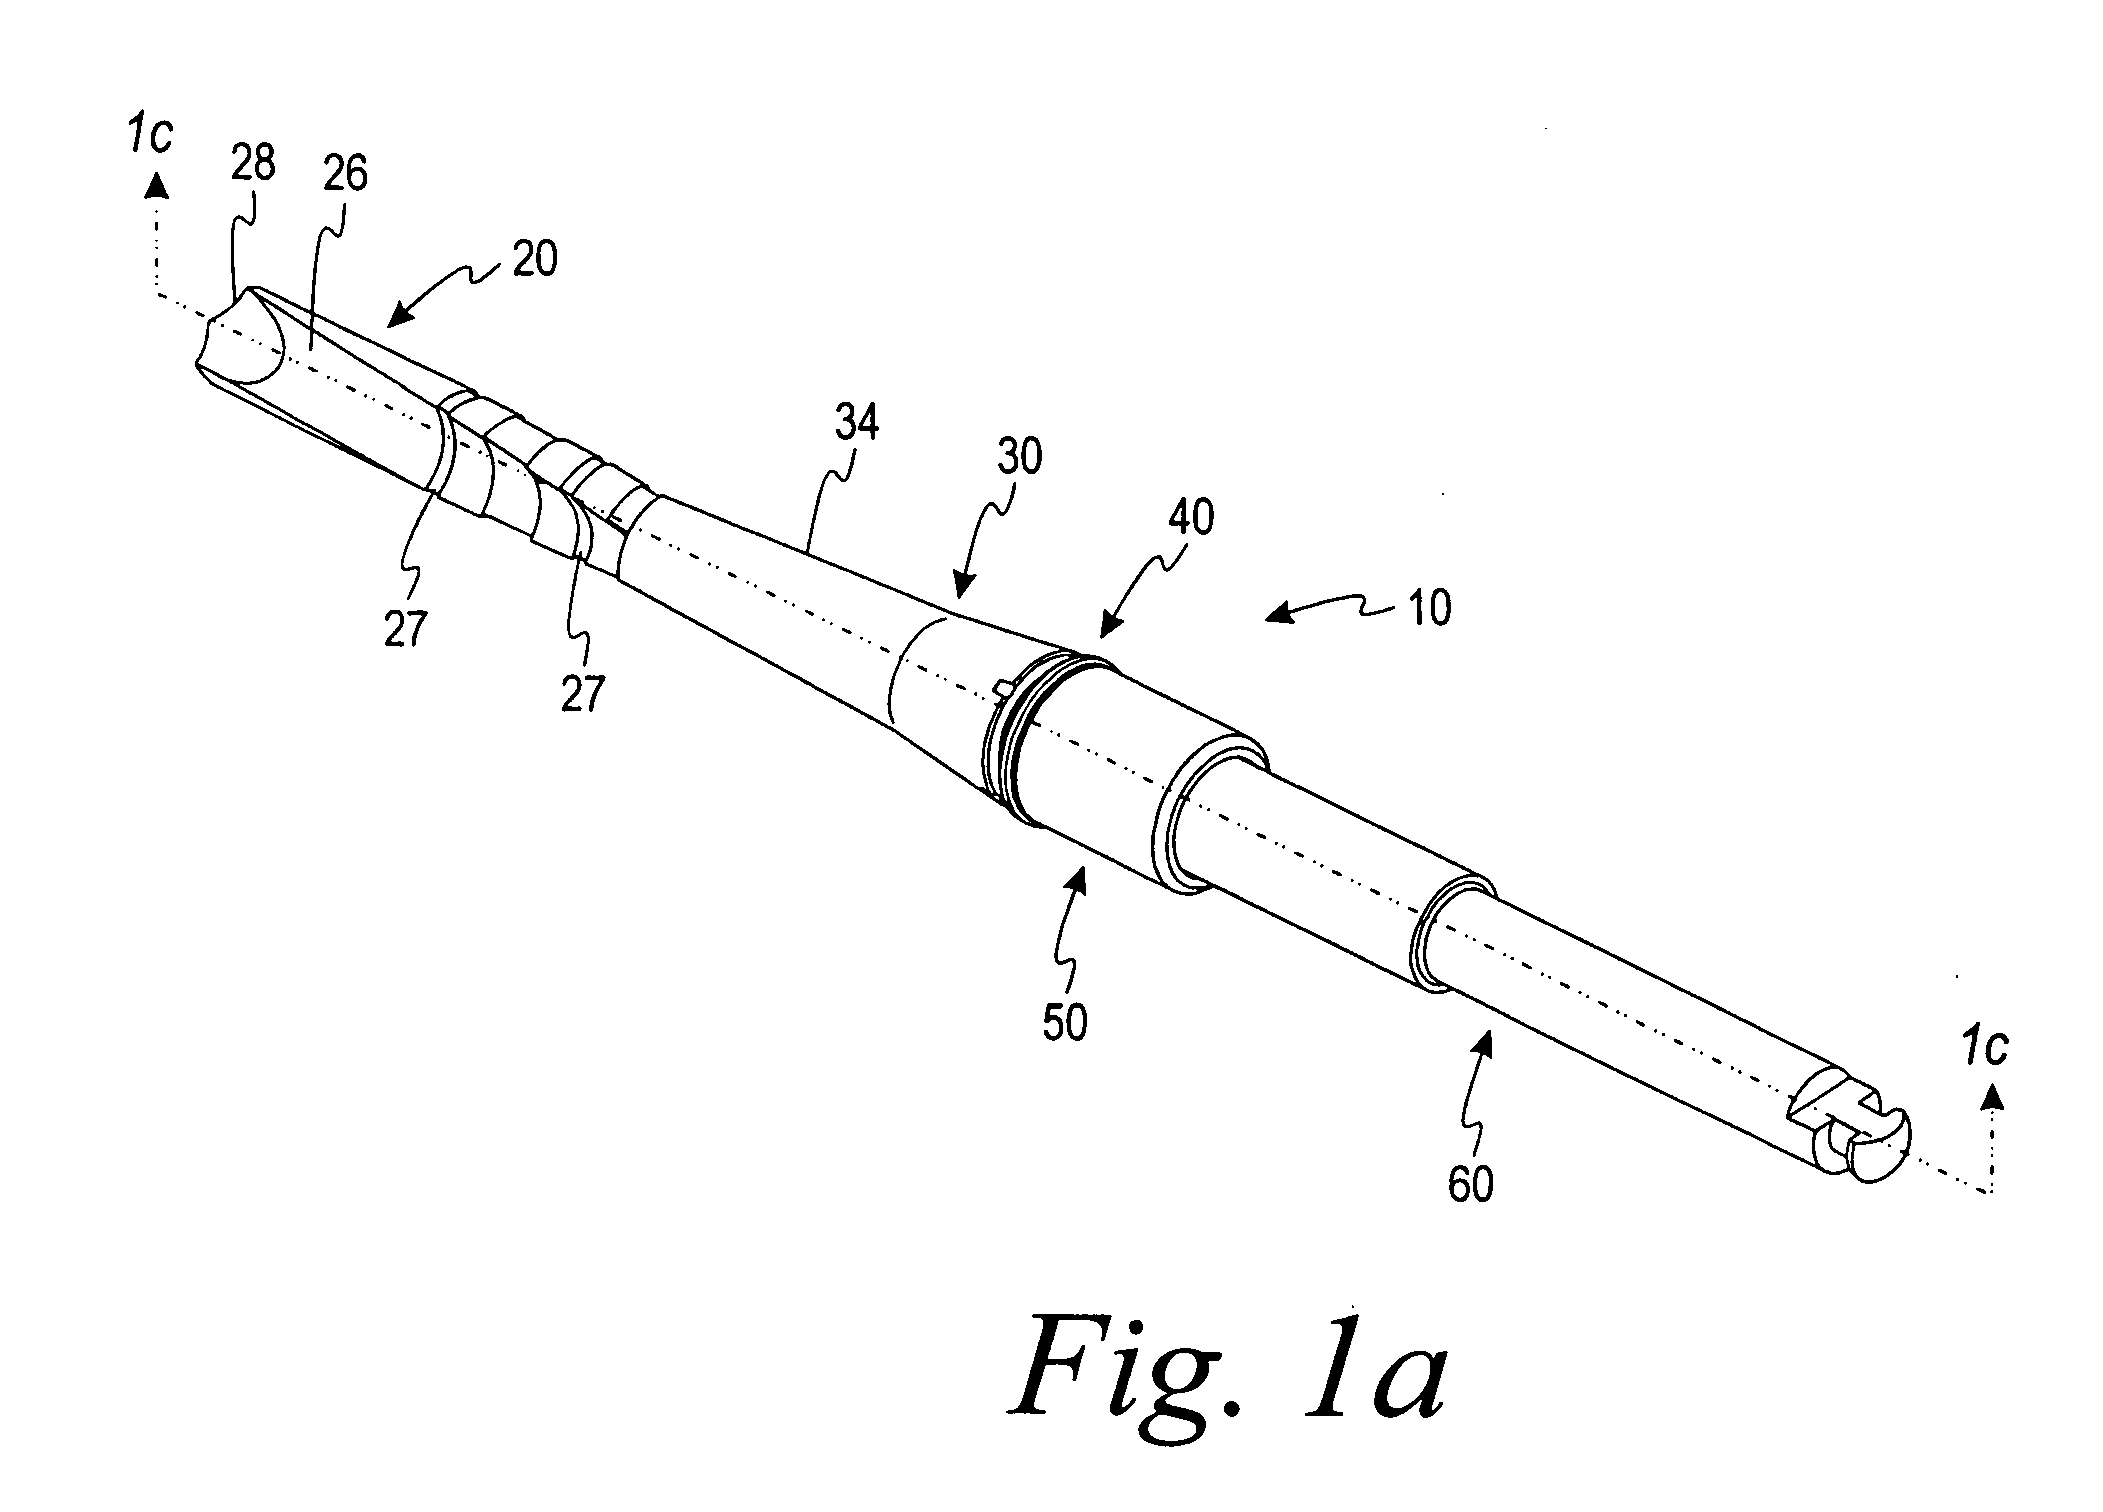 Drill bit assembly for bone tissue including depth limiting feature